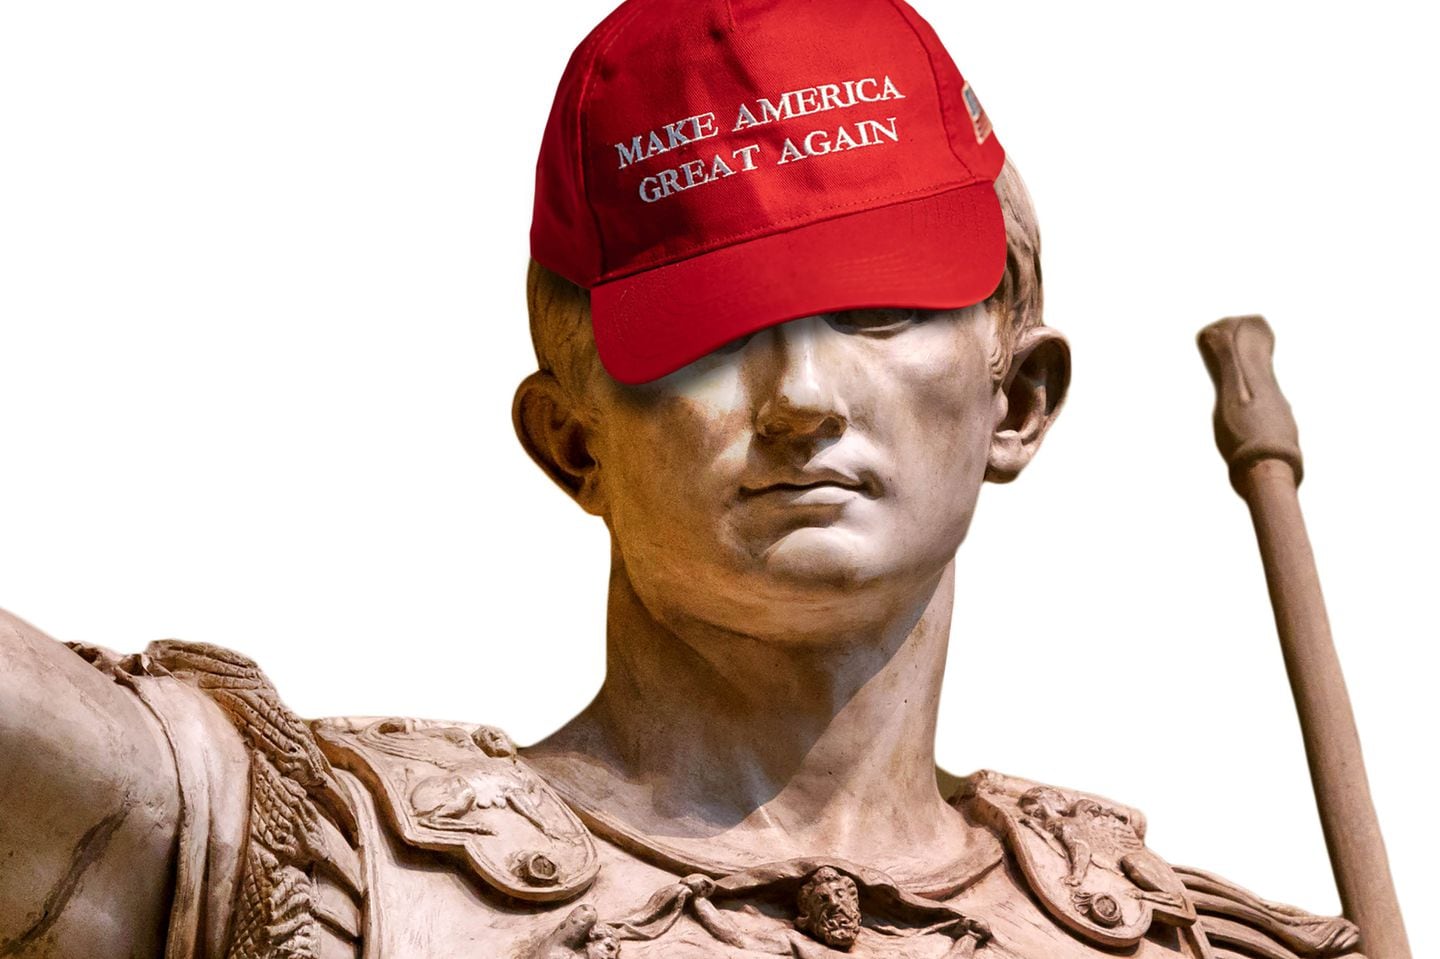 "This doesn’t mean Caesarist leaders are less dangerous than fascist ones," the author writes. "They’re actually more threatening in one sense."